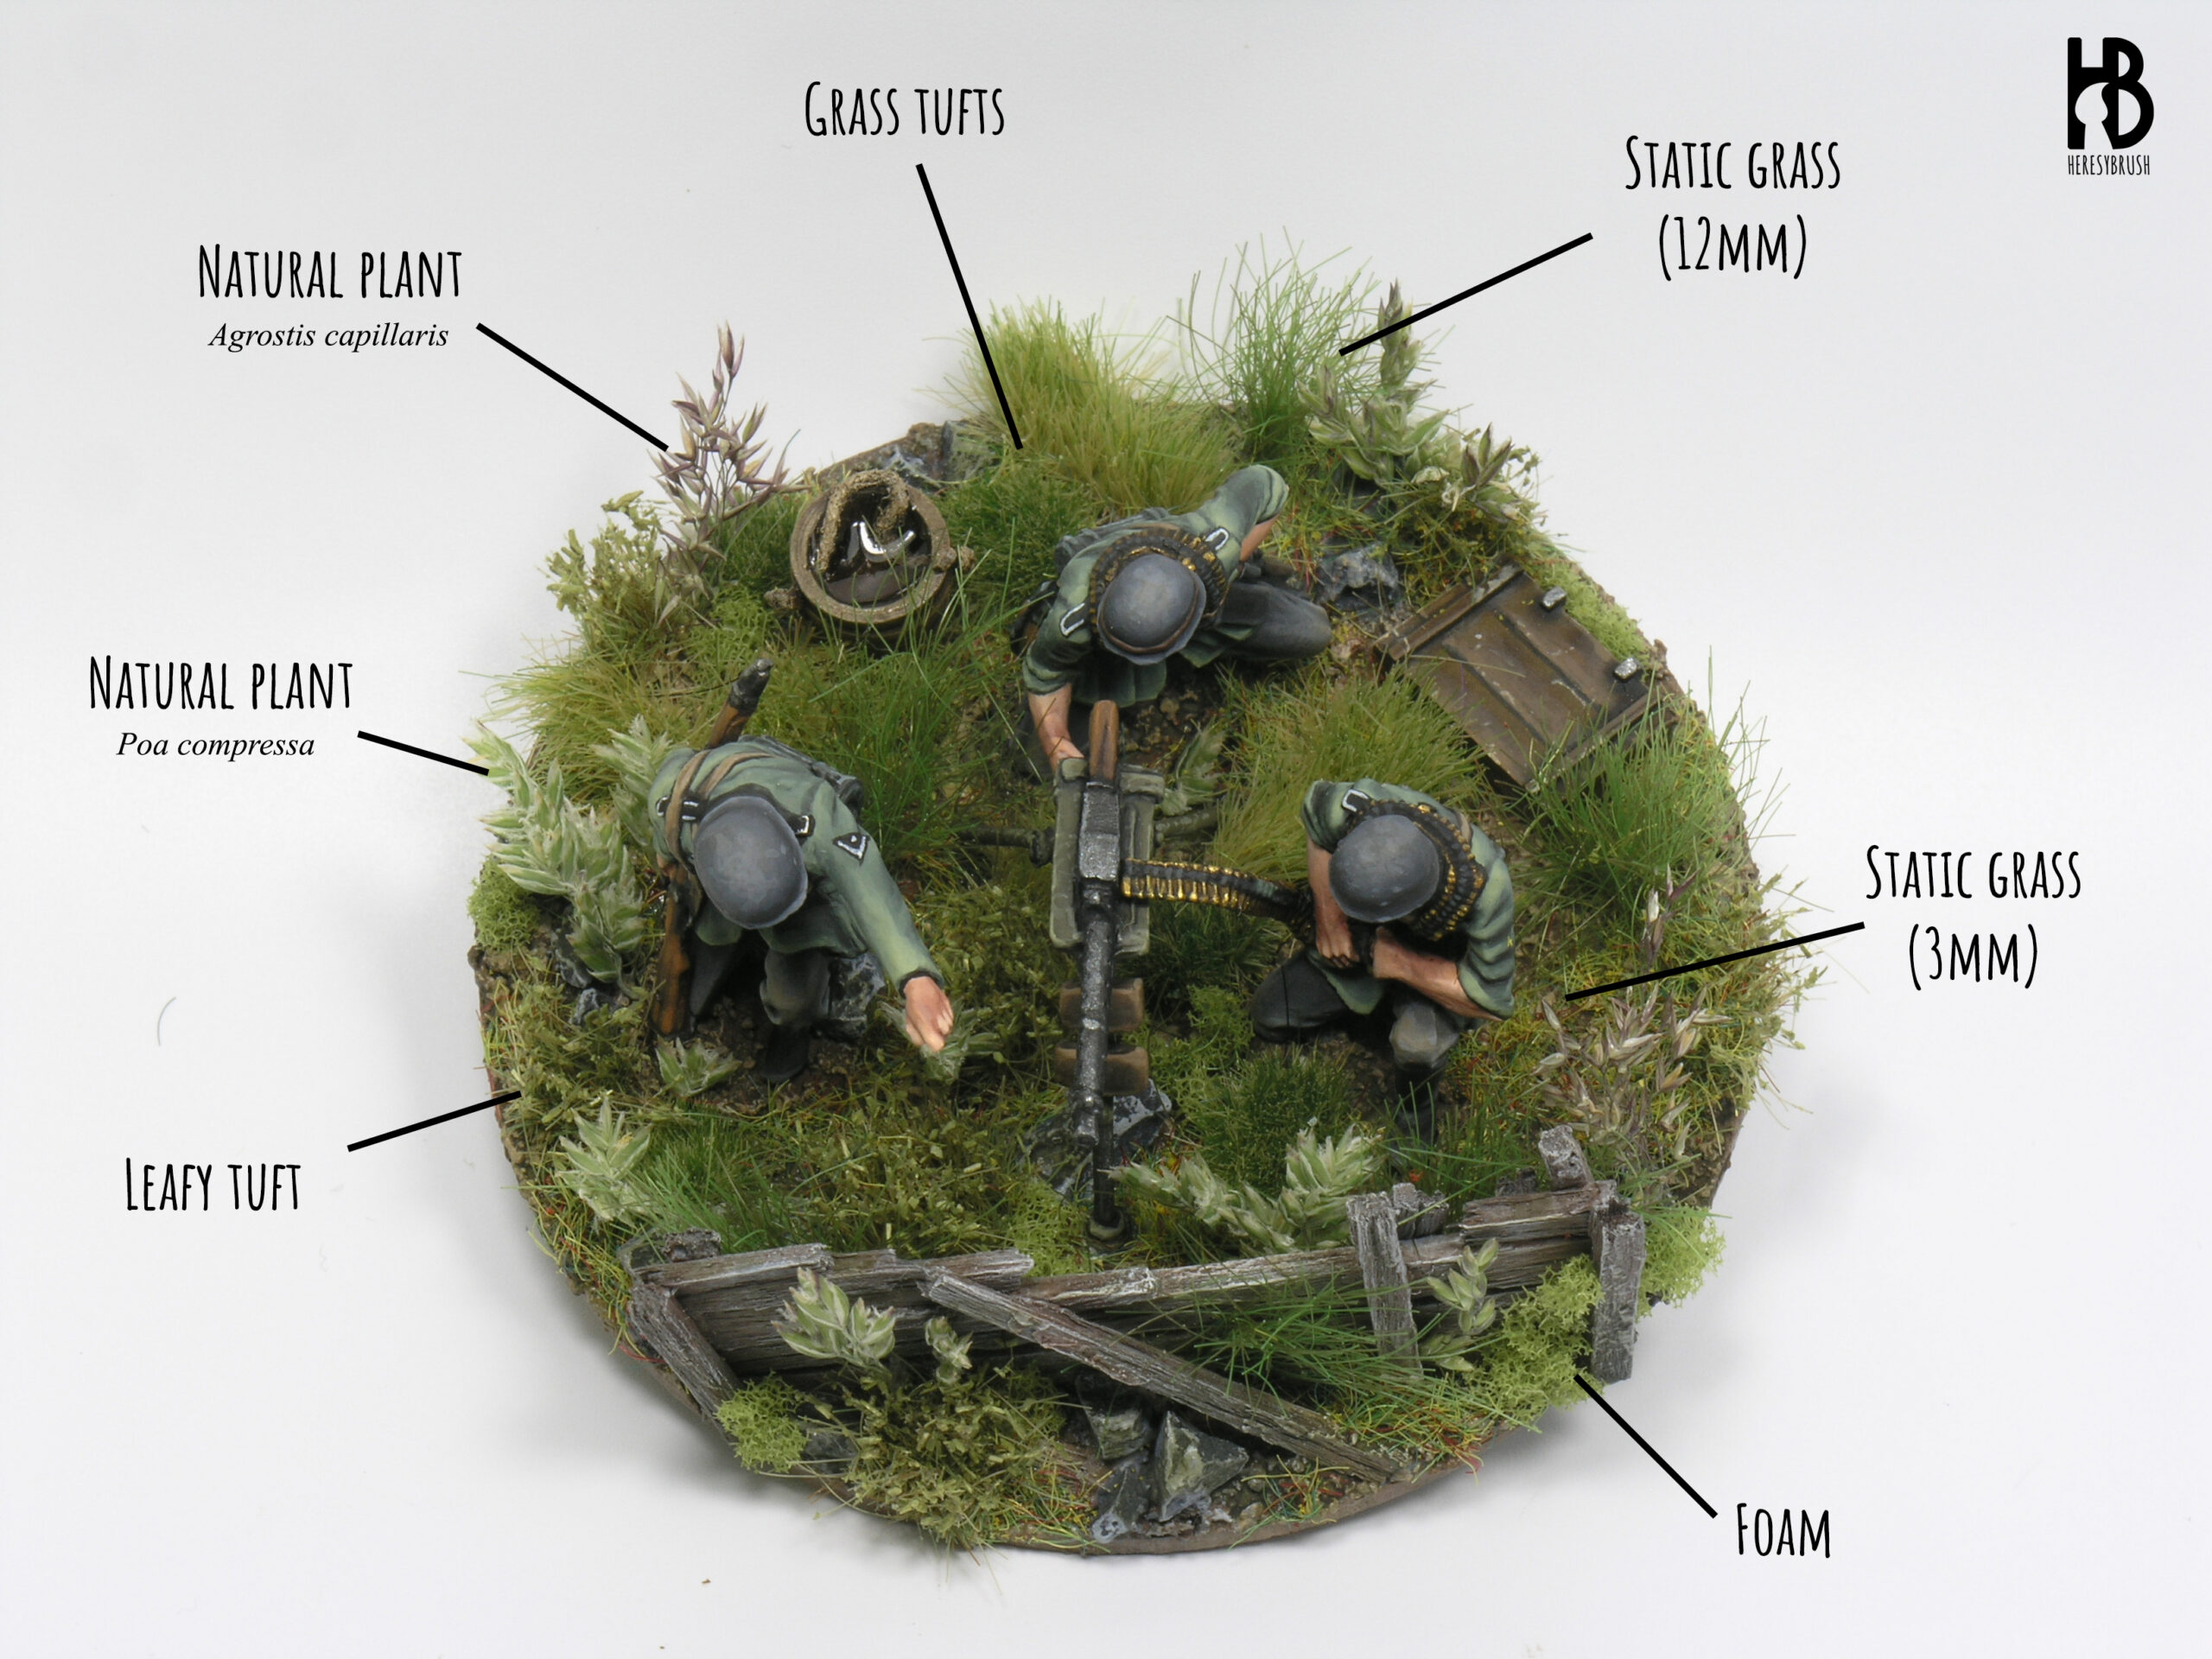 How to Easily Improve Your Miniature Bases - My Favorite Tips